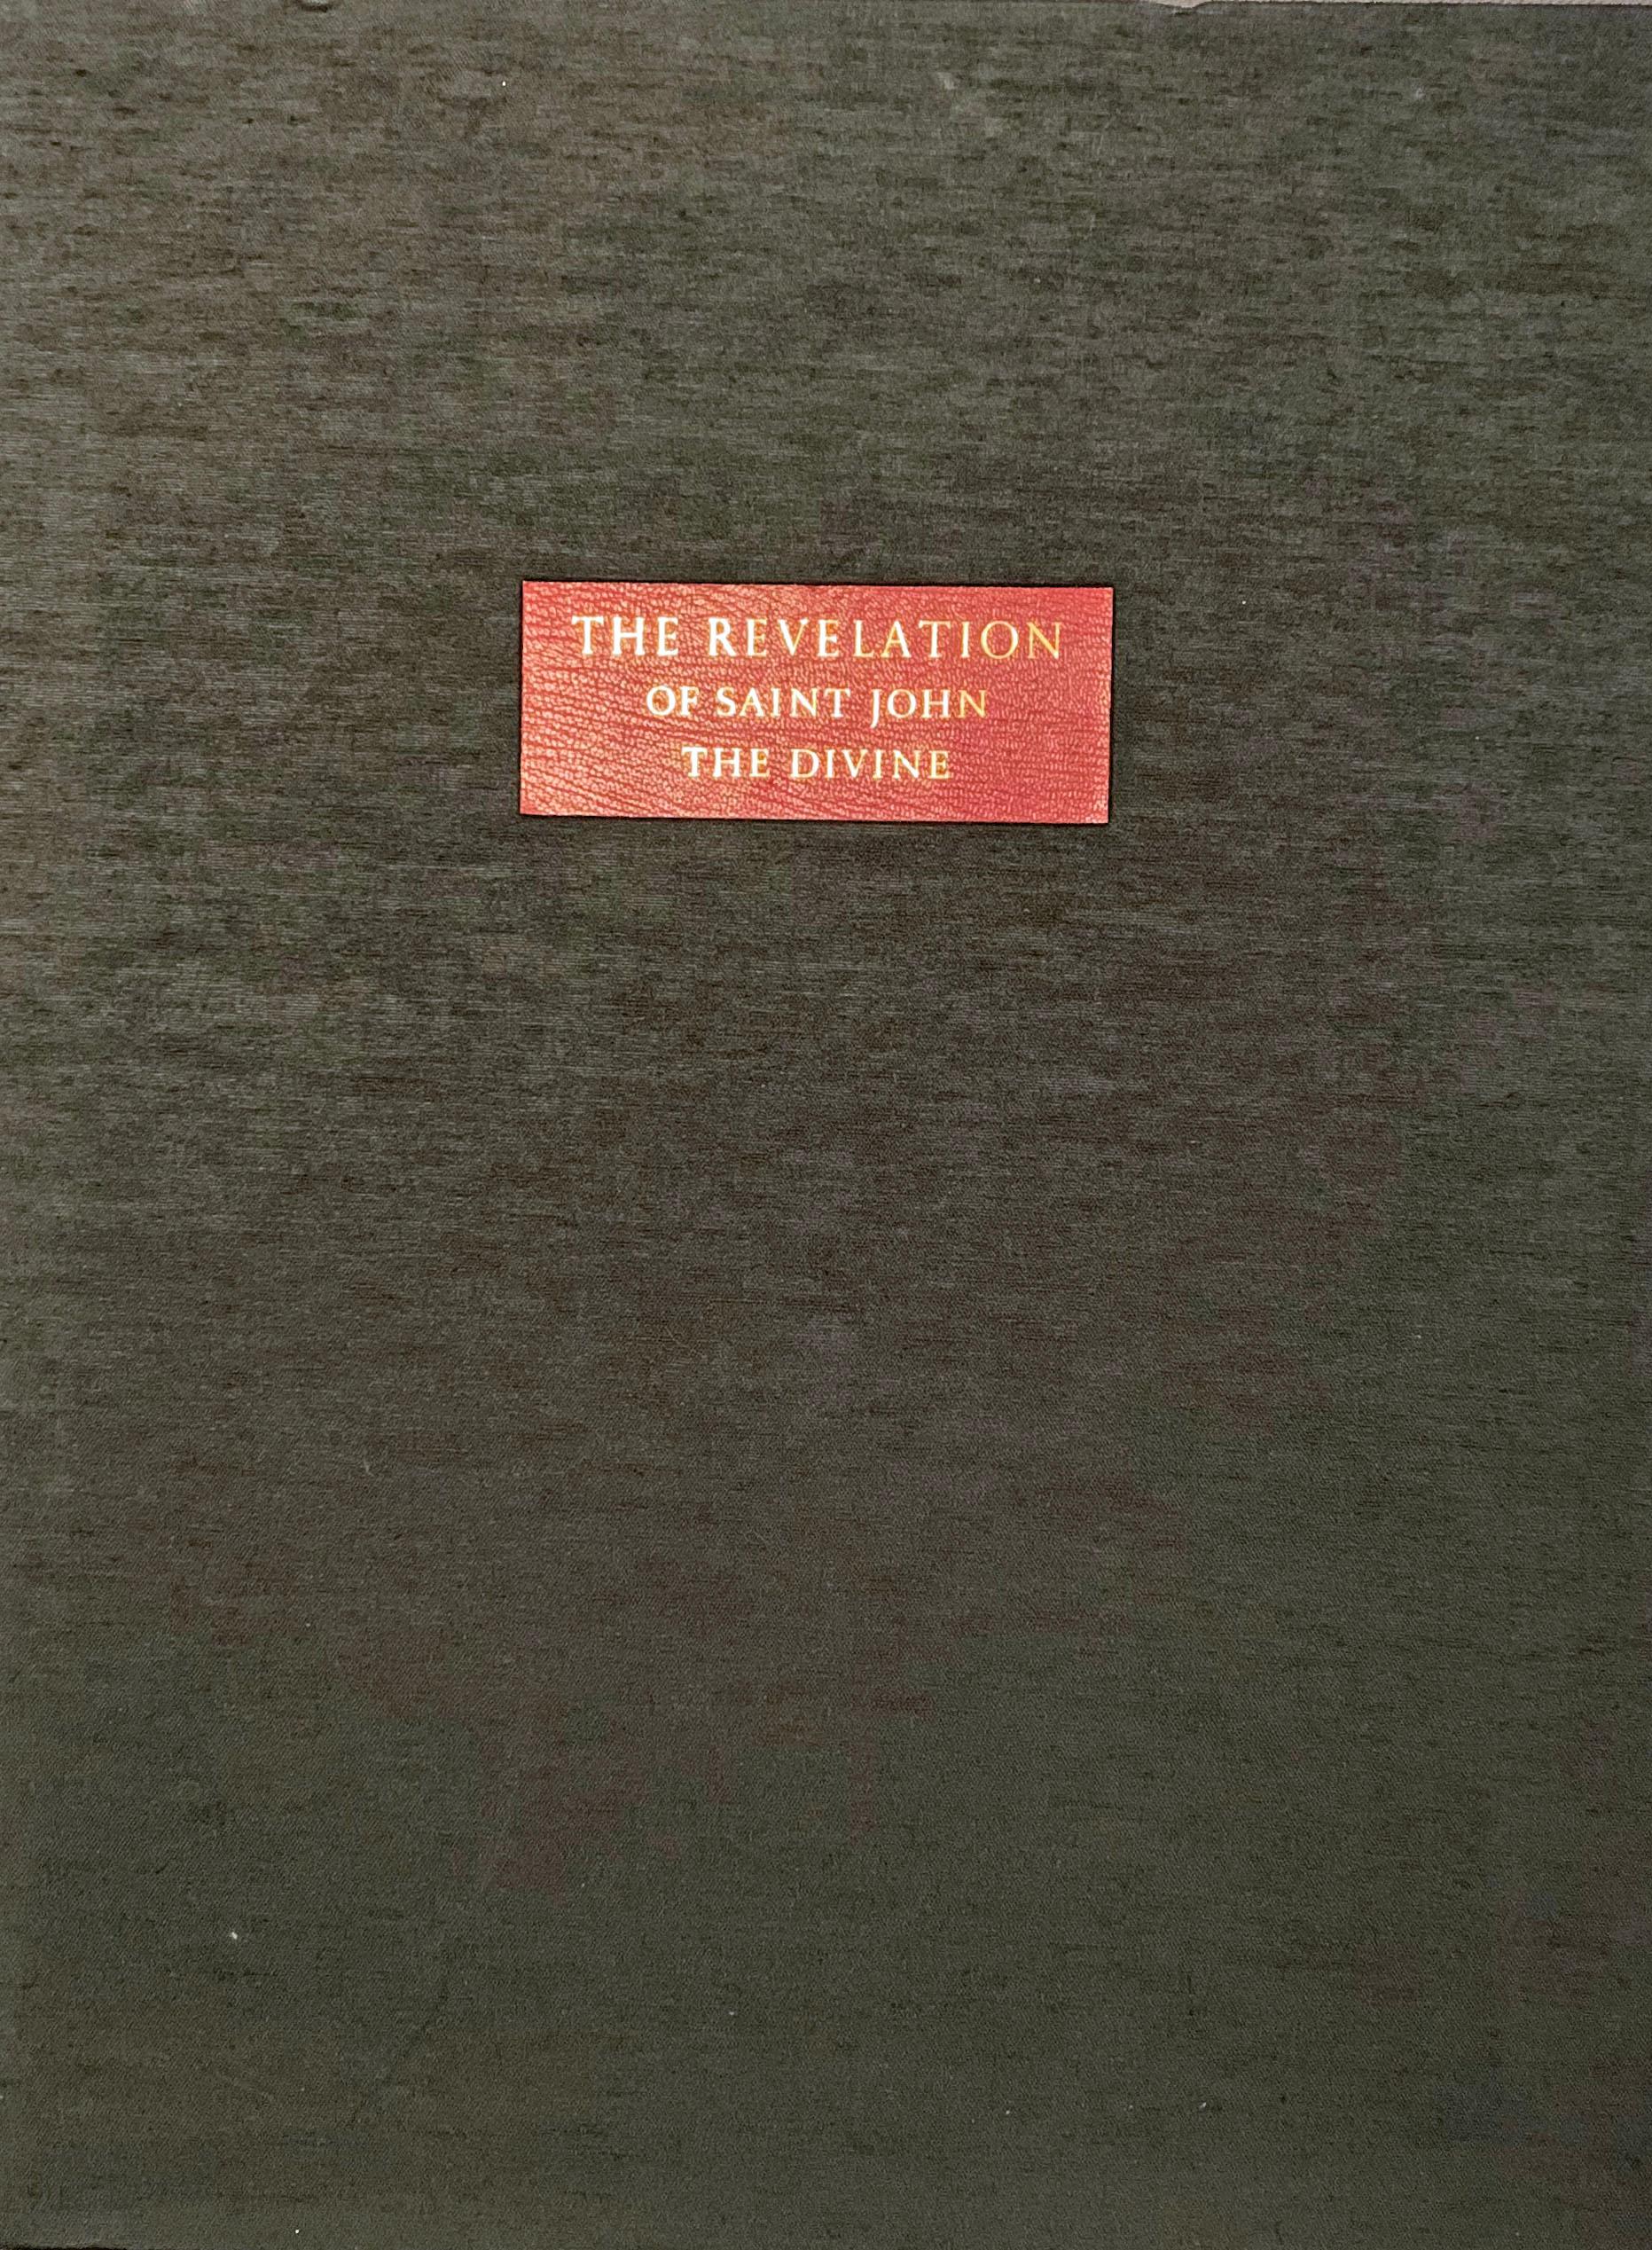 Crite, Alan Rohan. THE REVELATION OF SAINT JOHN THE DIVINE. Limited Editions Club, NY, 1995. Number 88 of the edition of 300 copies. Large folio (22 x 16 inches) clamshell box in black cloth with morocco label, book in Black Cloth, with morocco